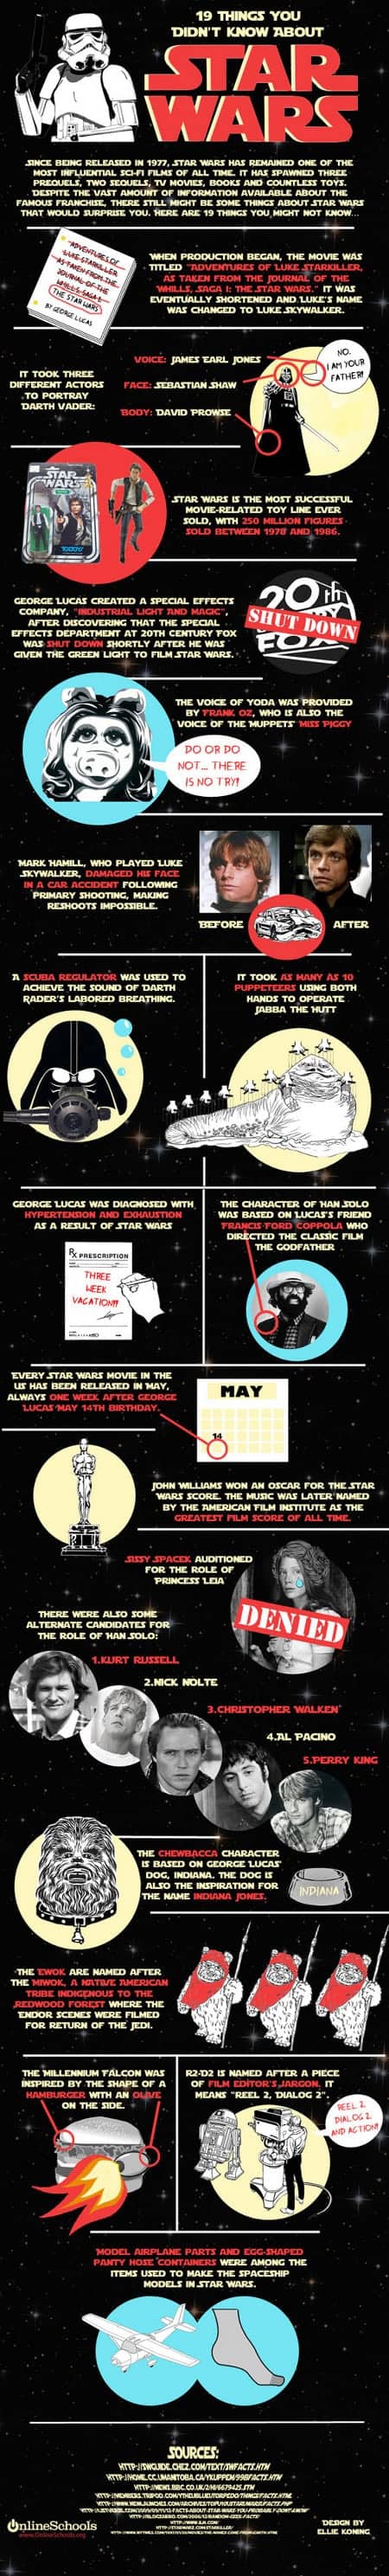 19 Things You Didn't Know About Star Wars